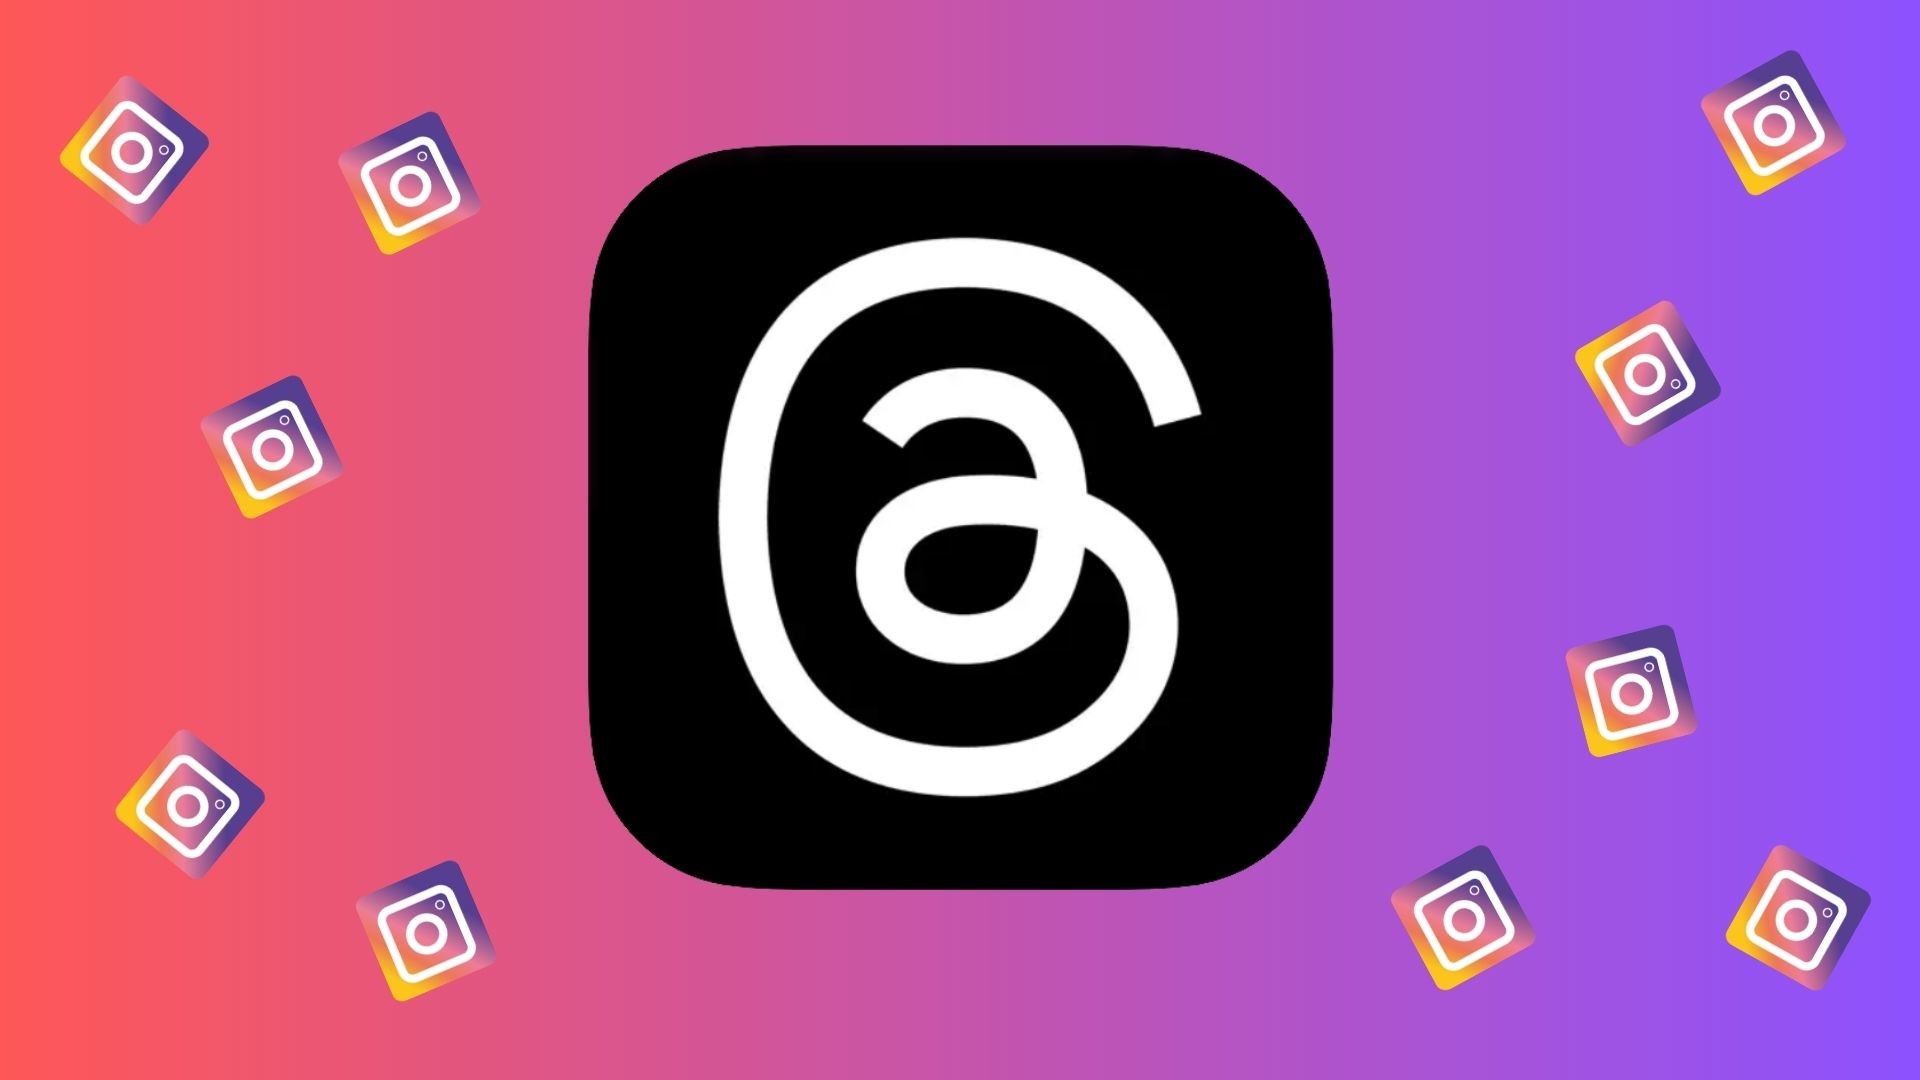 About the Threads app from Instagram, which is leading the social media  sector